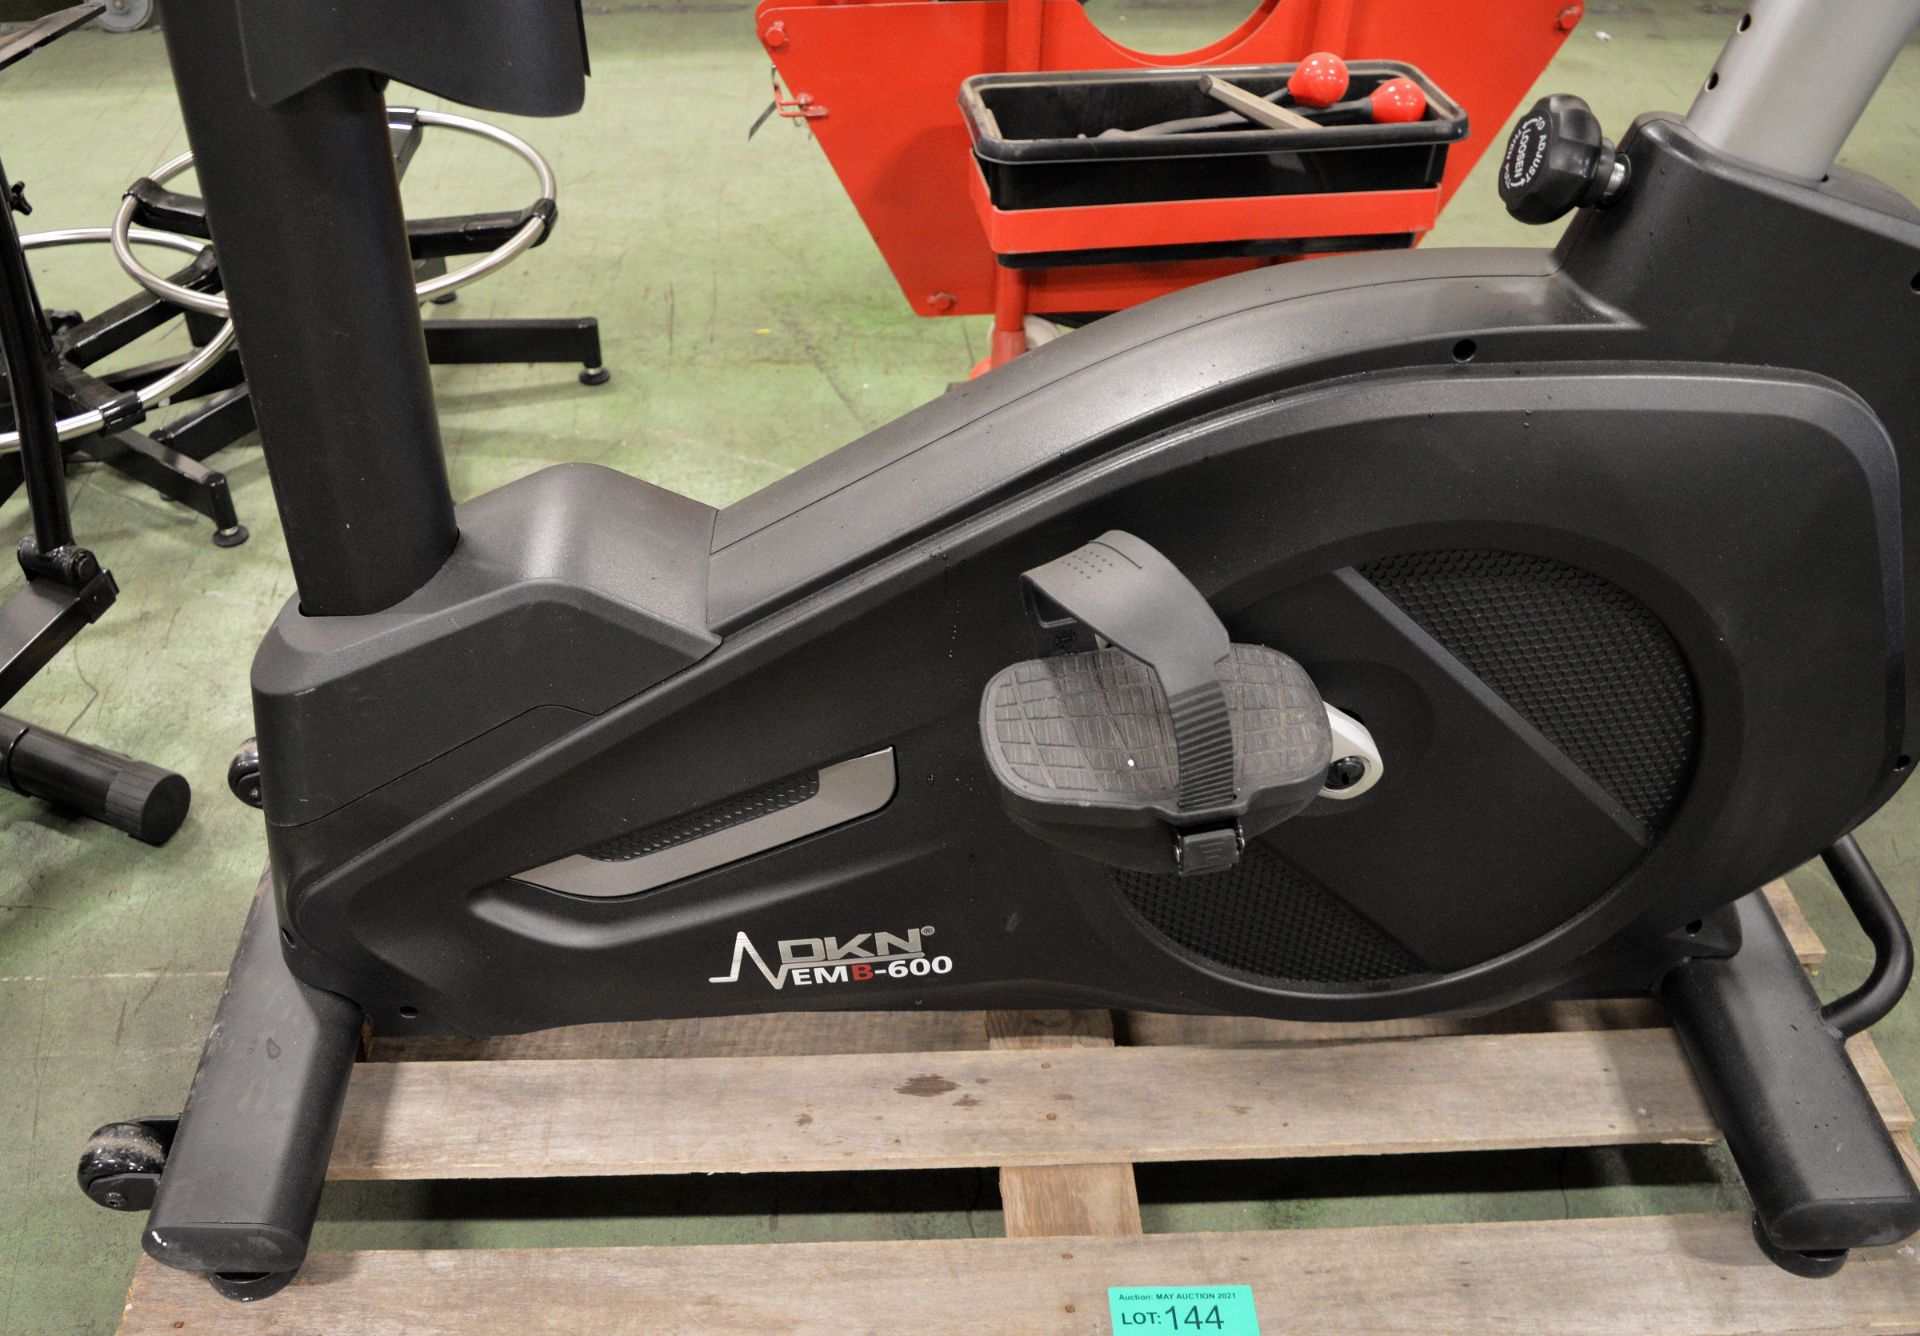 DKN EMB-600 exercise bike - Image 4 of 4